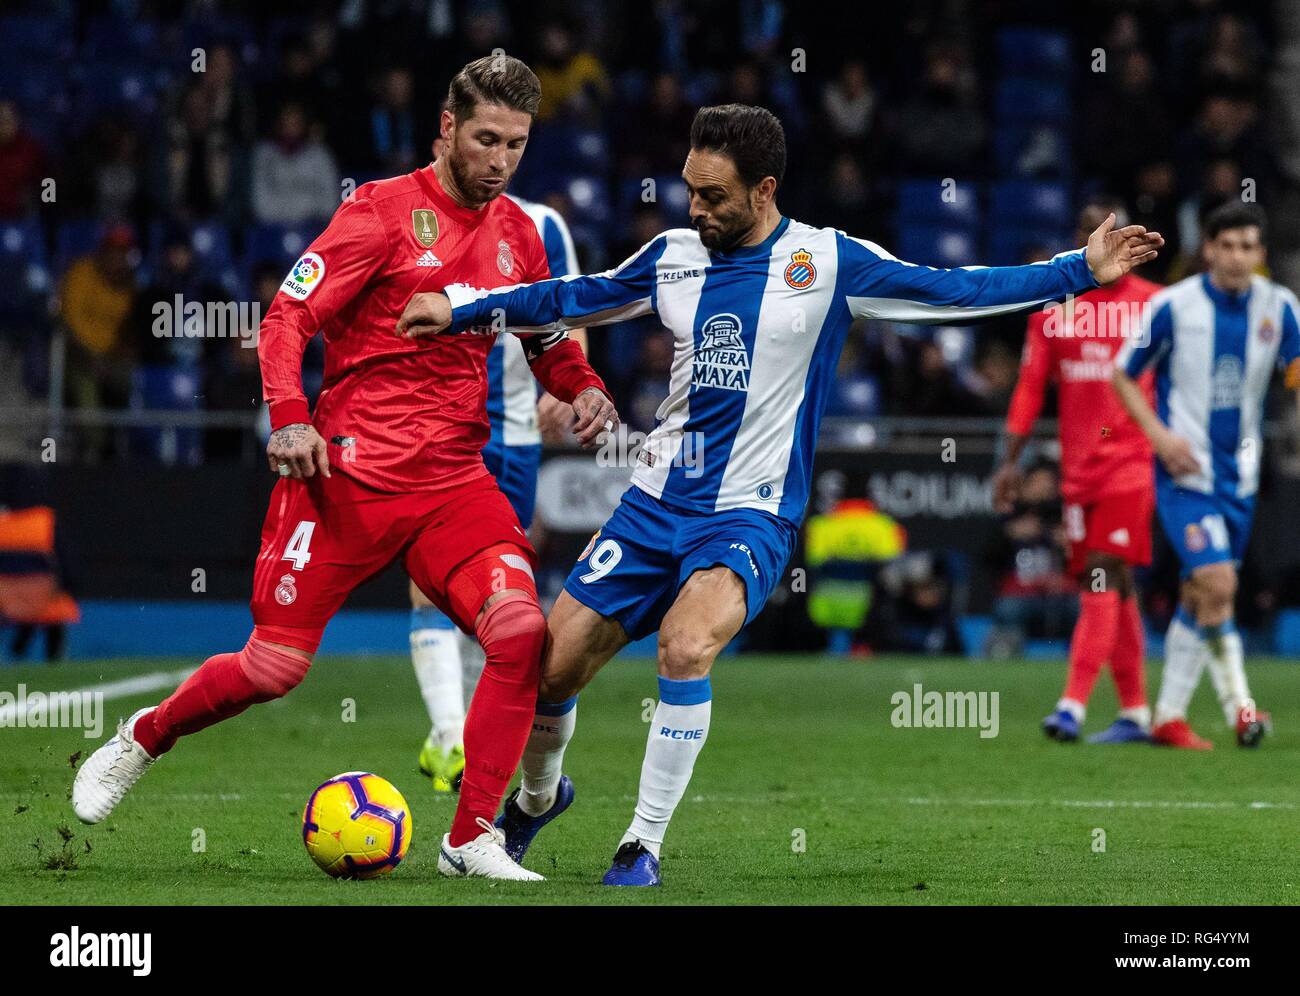 Barcelona, Spain. 27th Jan, 2019. RCD Espanyol's Sergio Garcia (front R)  vies with Real Madrid's Sergio Ramos during a Spanish league match between  RCD Espanyol and Real Madrid in Barcelona, Spain, on